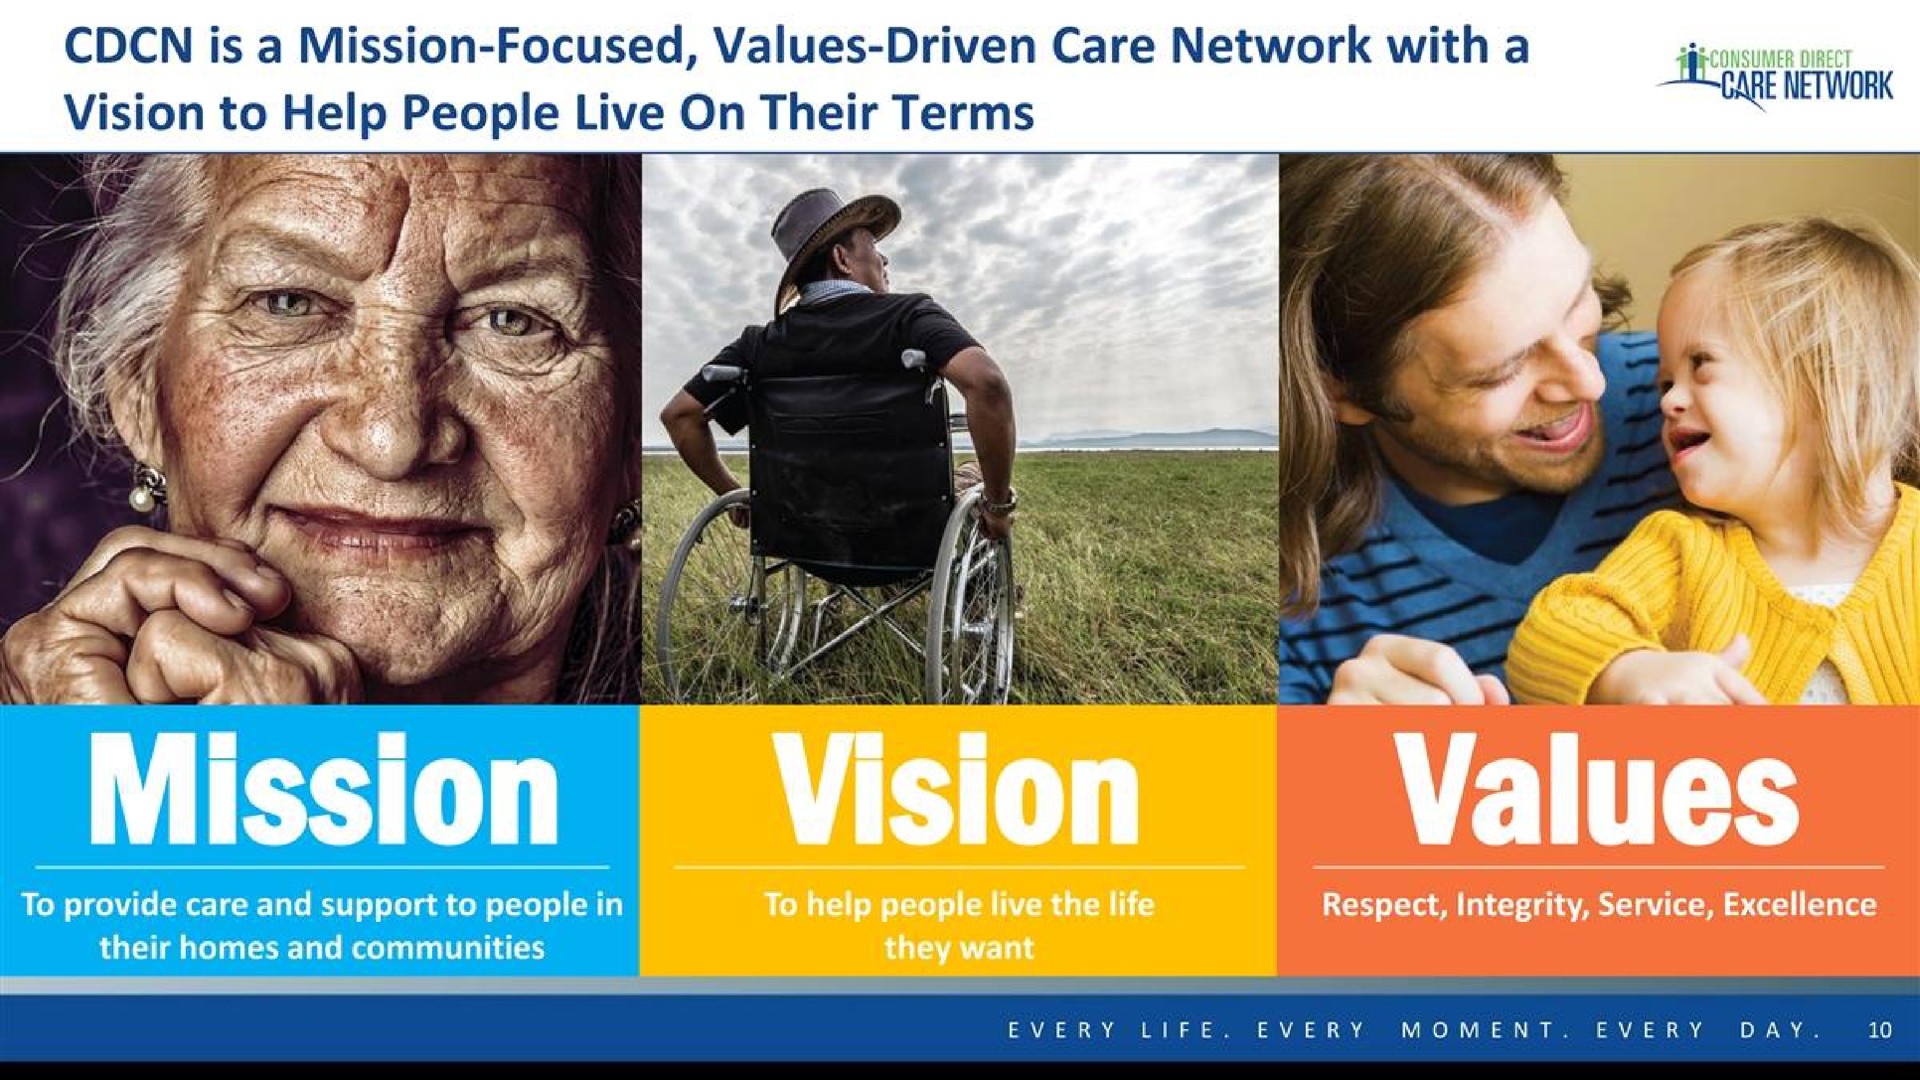 vision to help people live on their terms eels | Consumer Direct Care Network